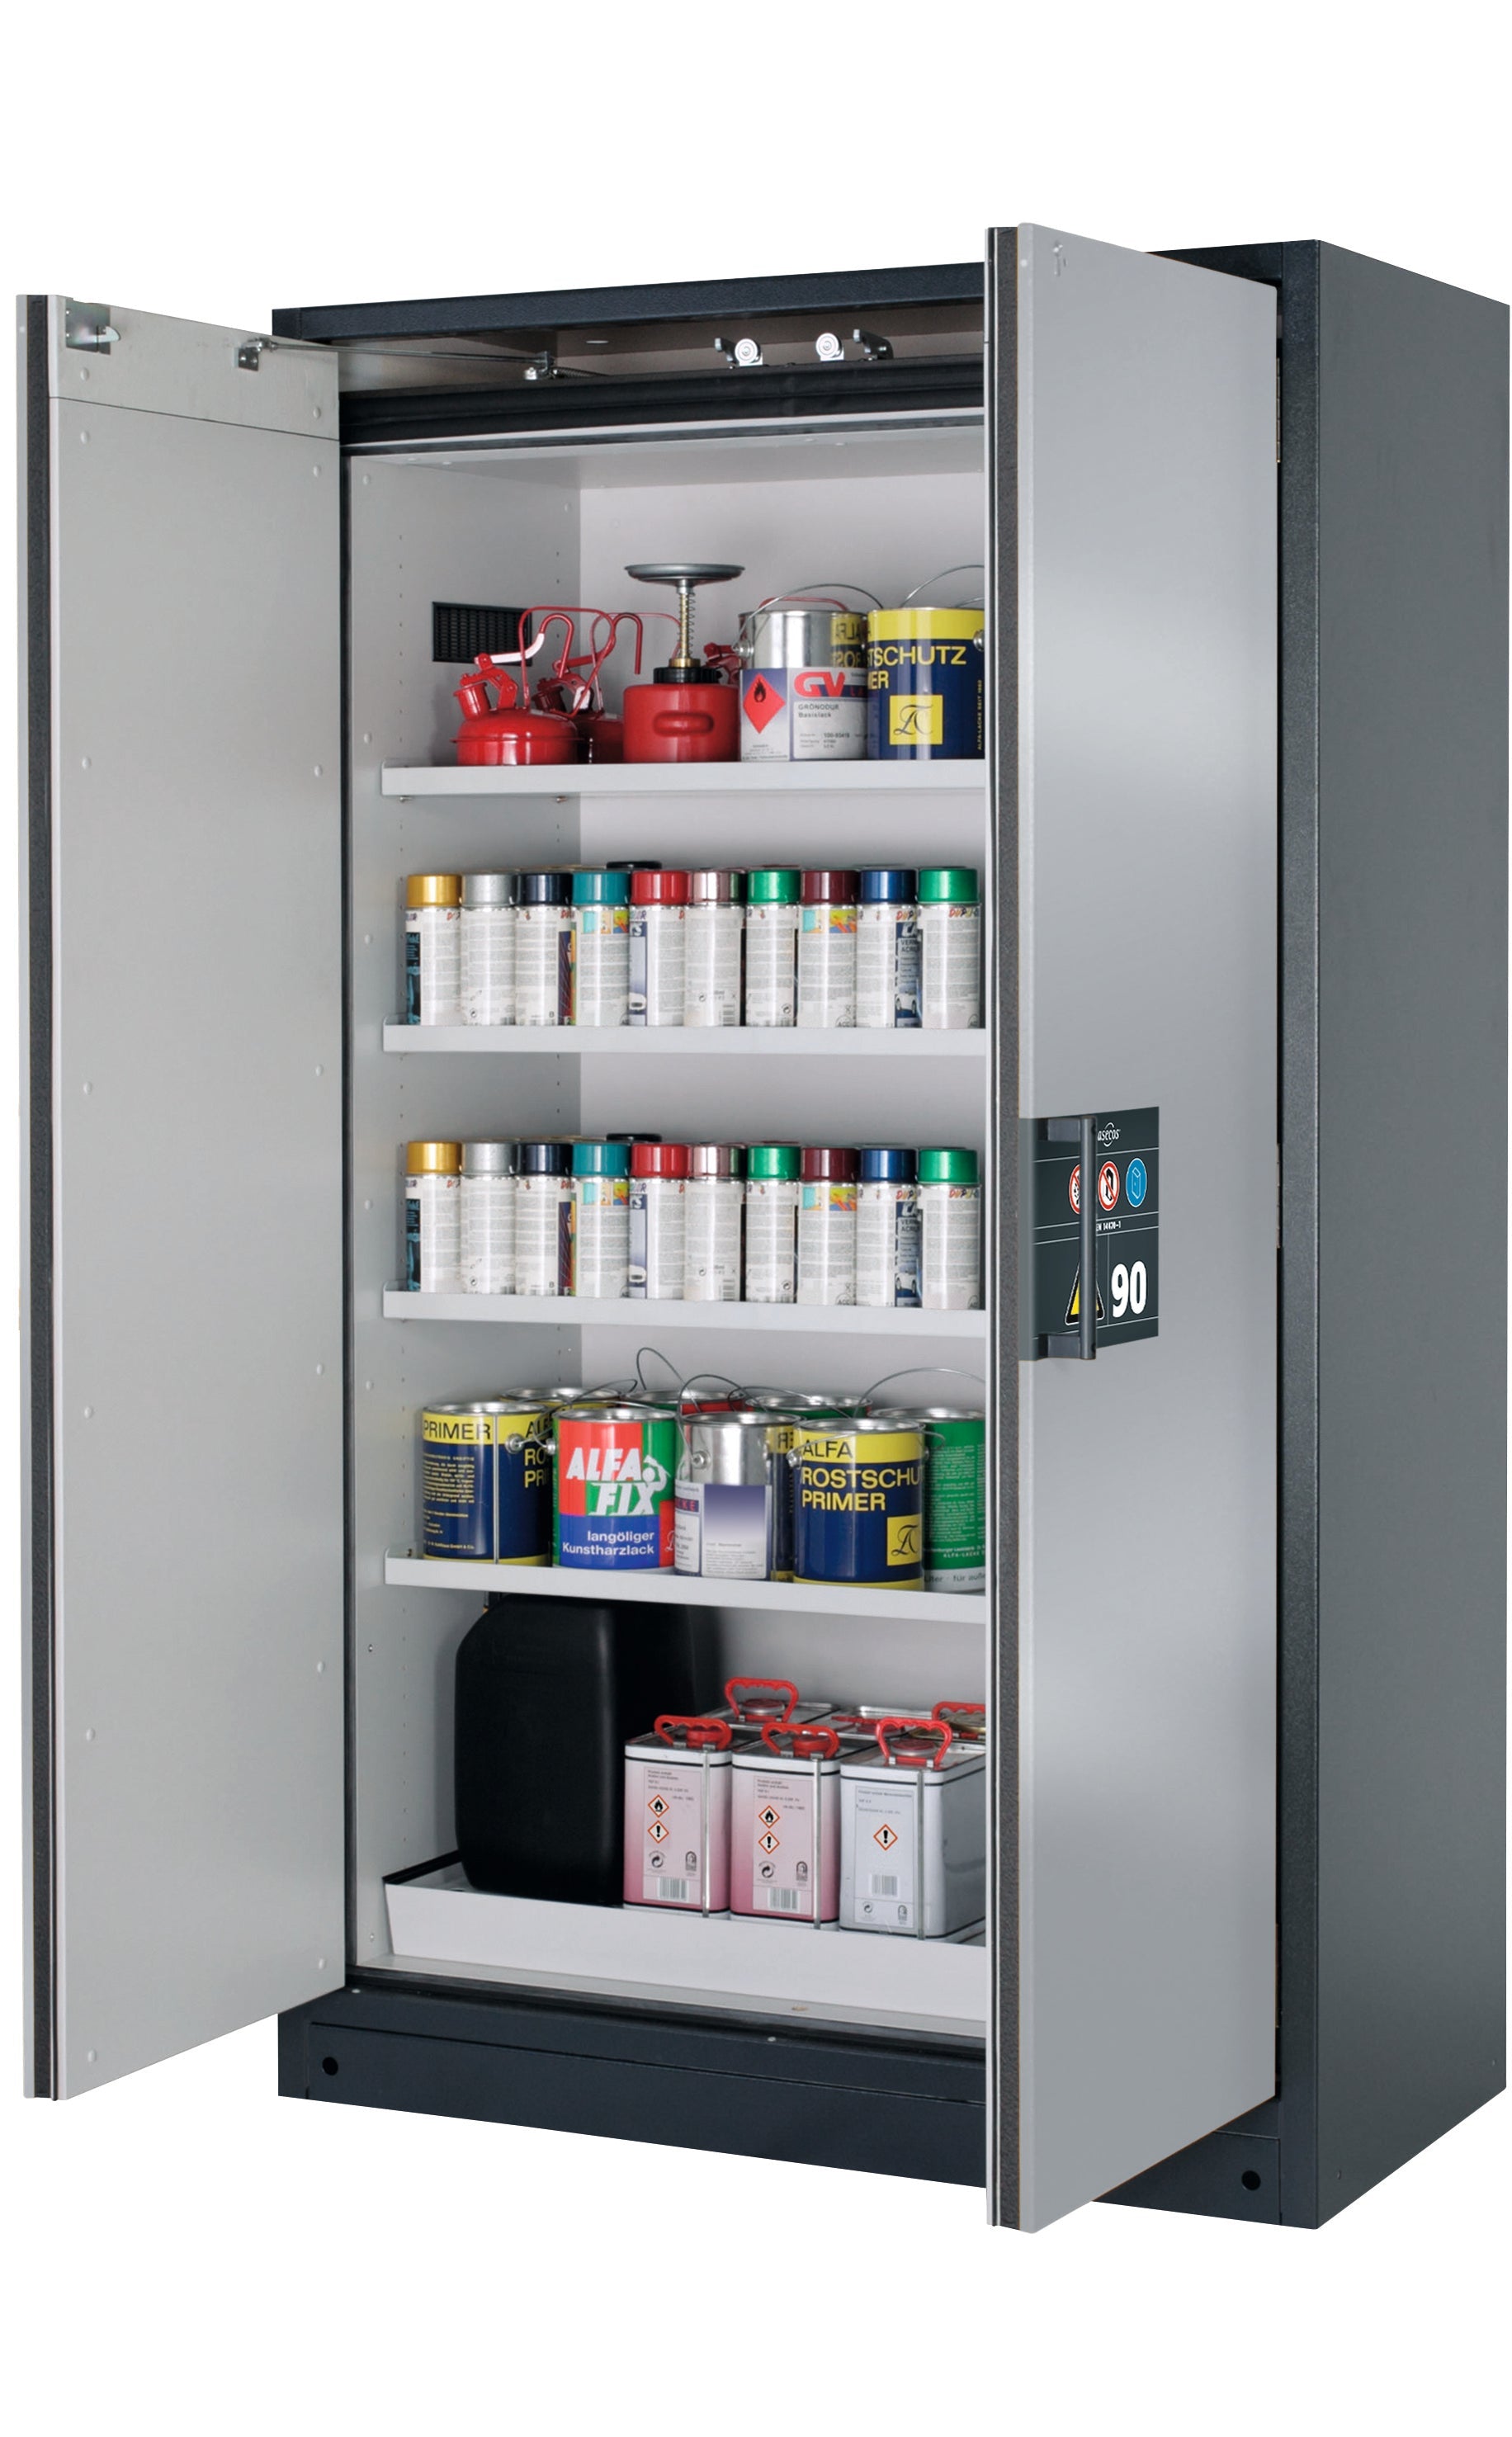 Type 90 safety storage cabinet Q-CLASSIC-90 model Q90.195.120 in asecos silver with 4x shelf standard (sheet steel),